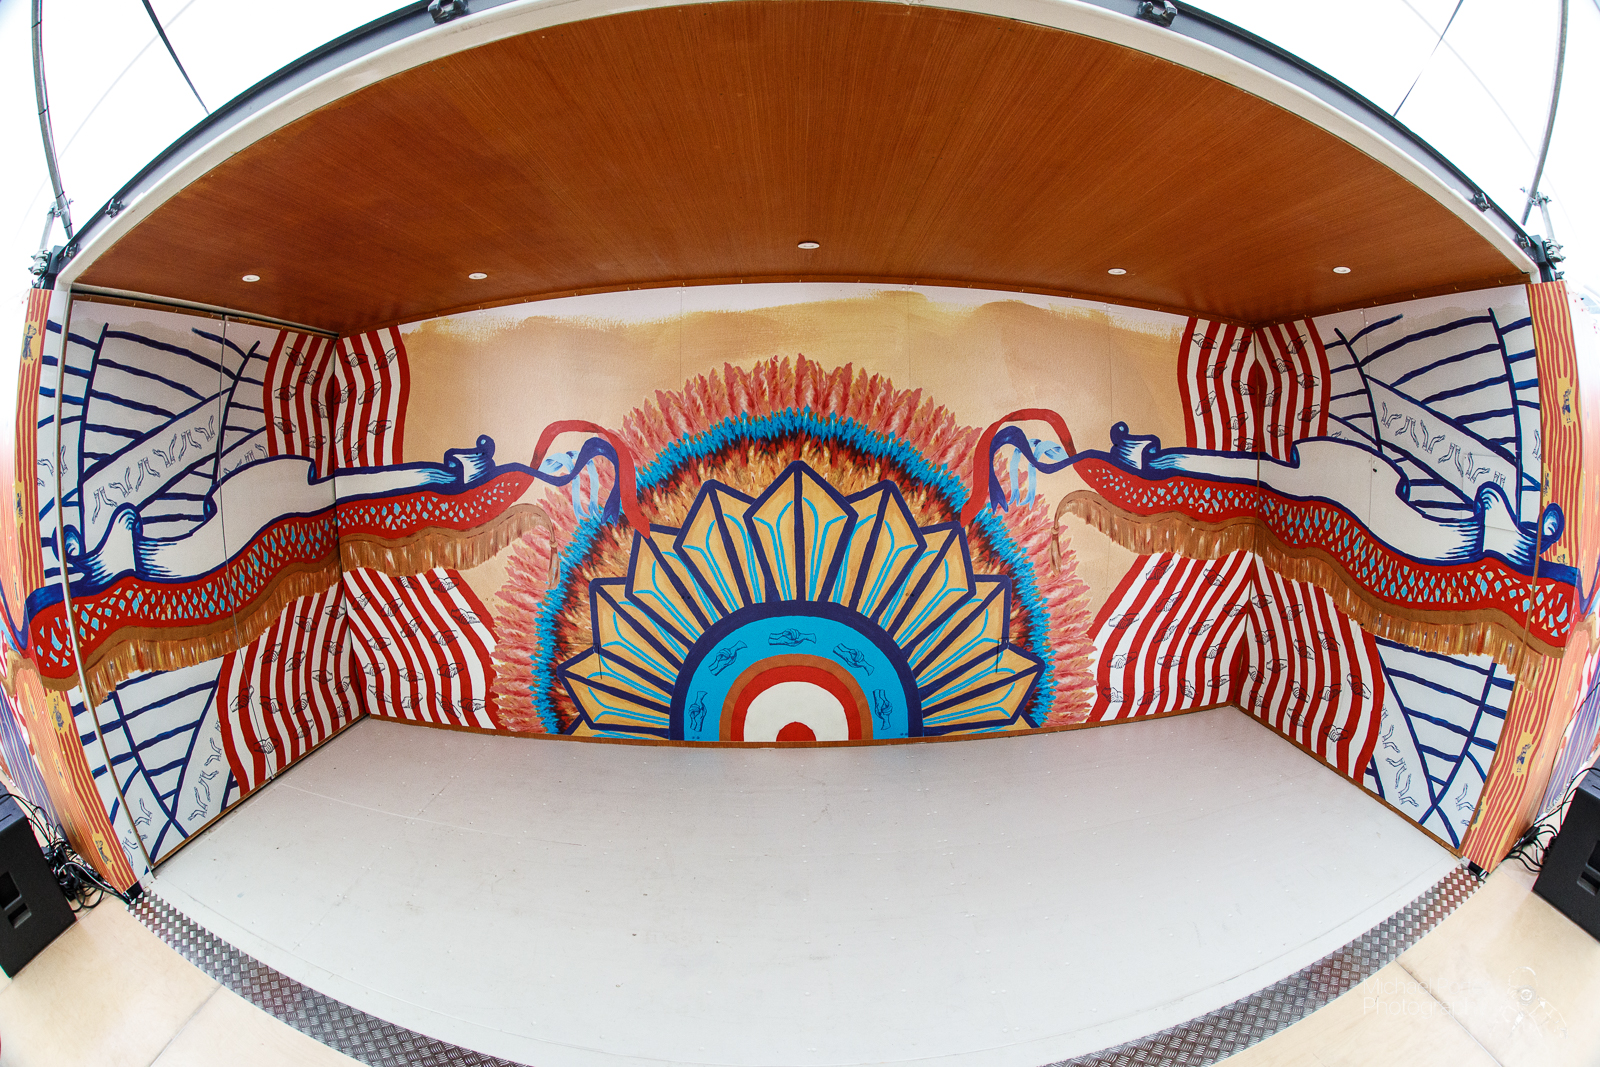 The inside of the mobile event tent. The walls are painted with colourful patterns.